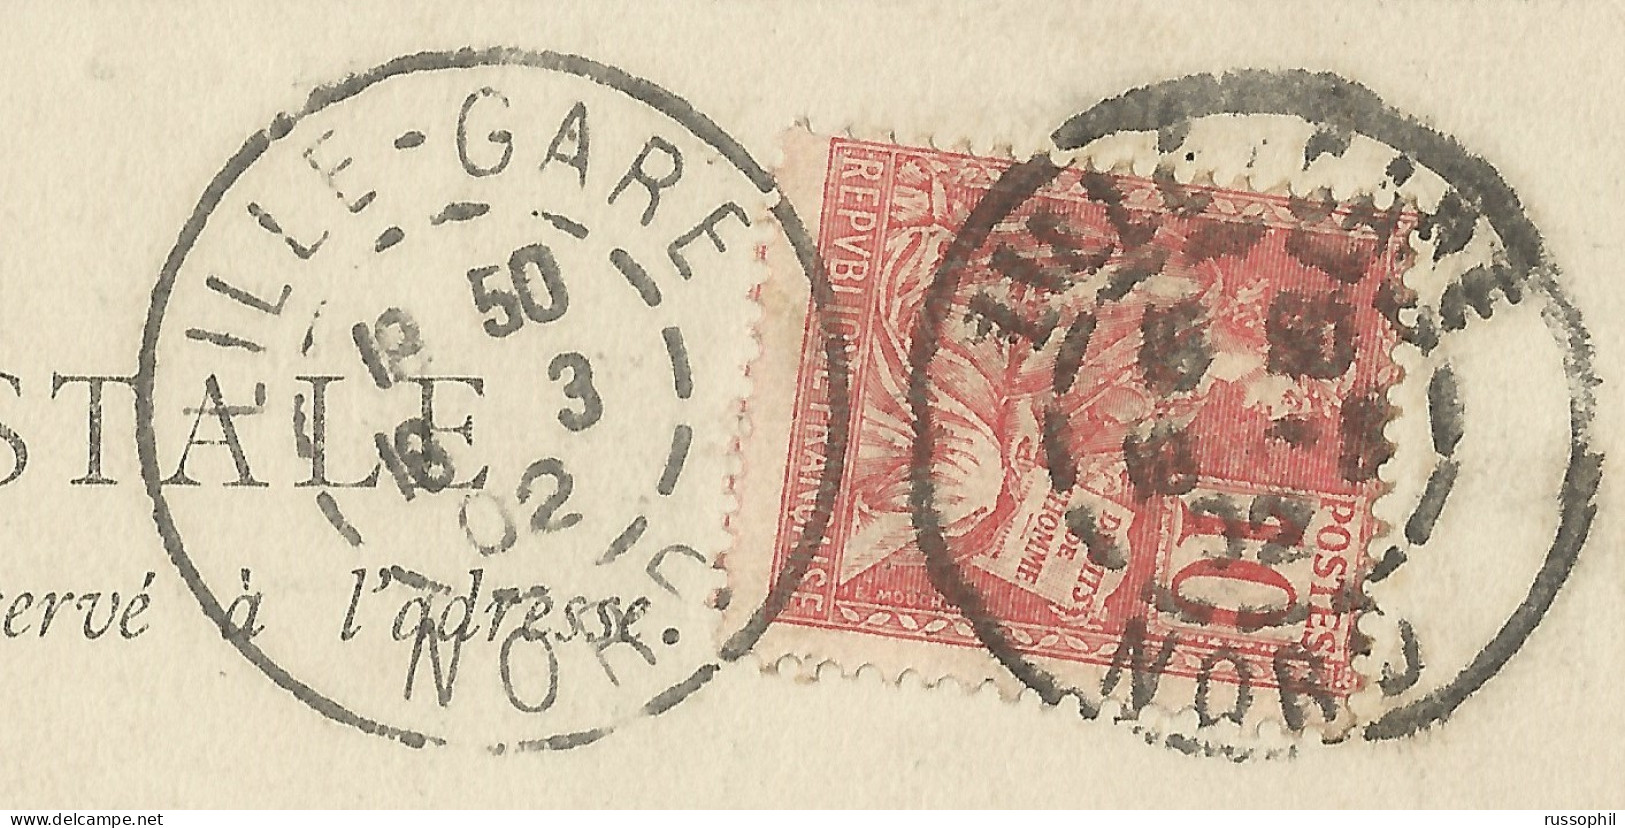 FRANCE - 59 - A3 PAIRED DAGUIN LIILE GARE - 1 CDS LARGE & 1 CDS SMALL CAPS LETTER - 1902 - Covers & Documents